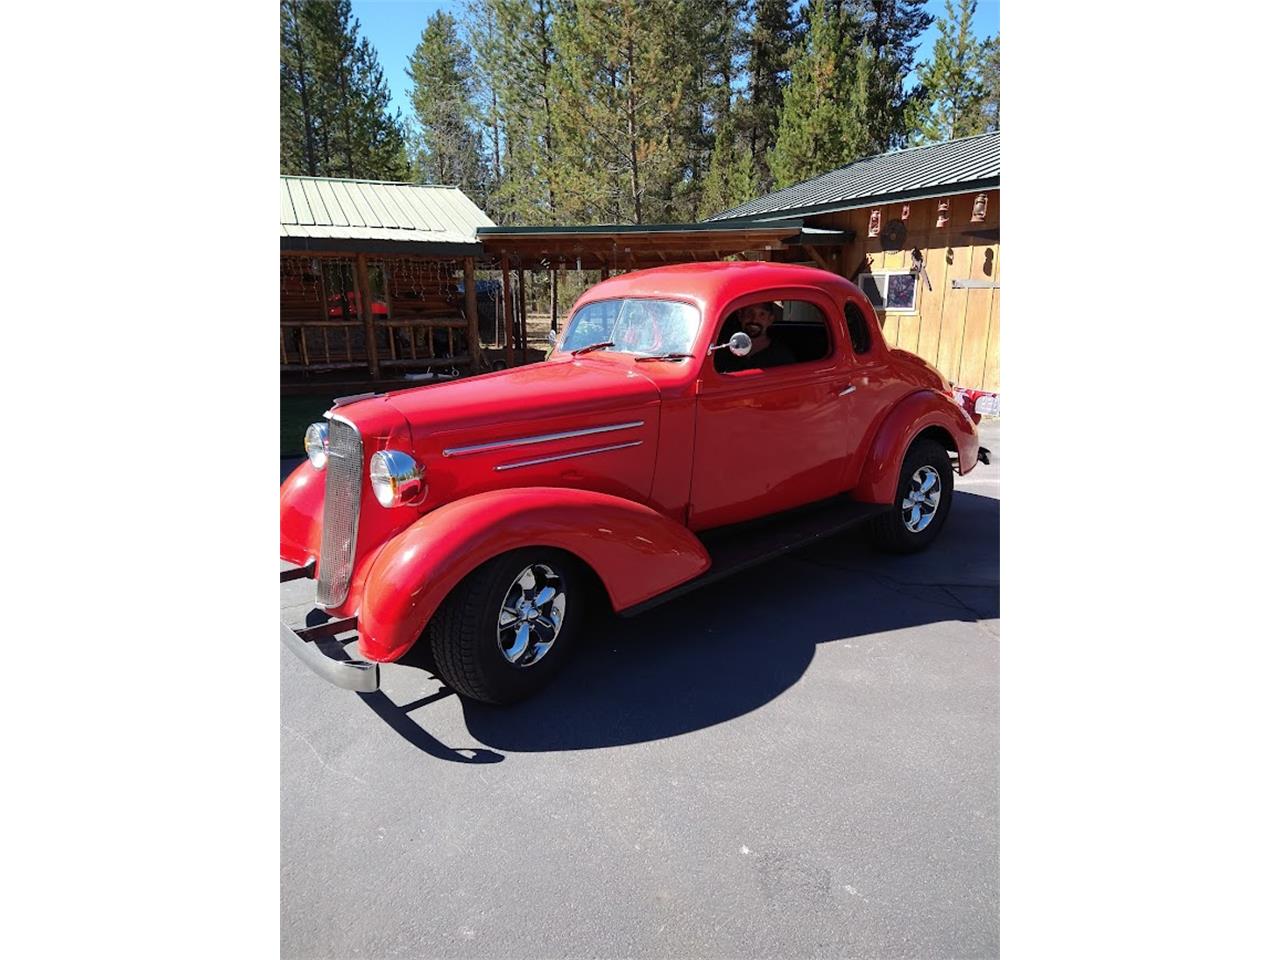 1936 Chevrolet Coupe in Lapine, Oregon